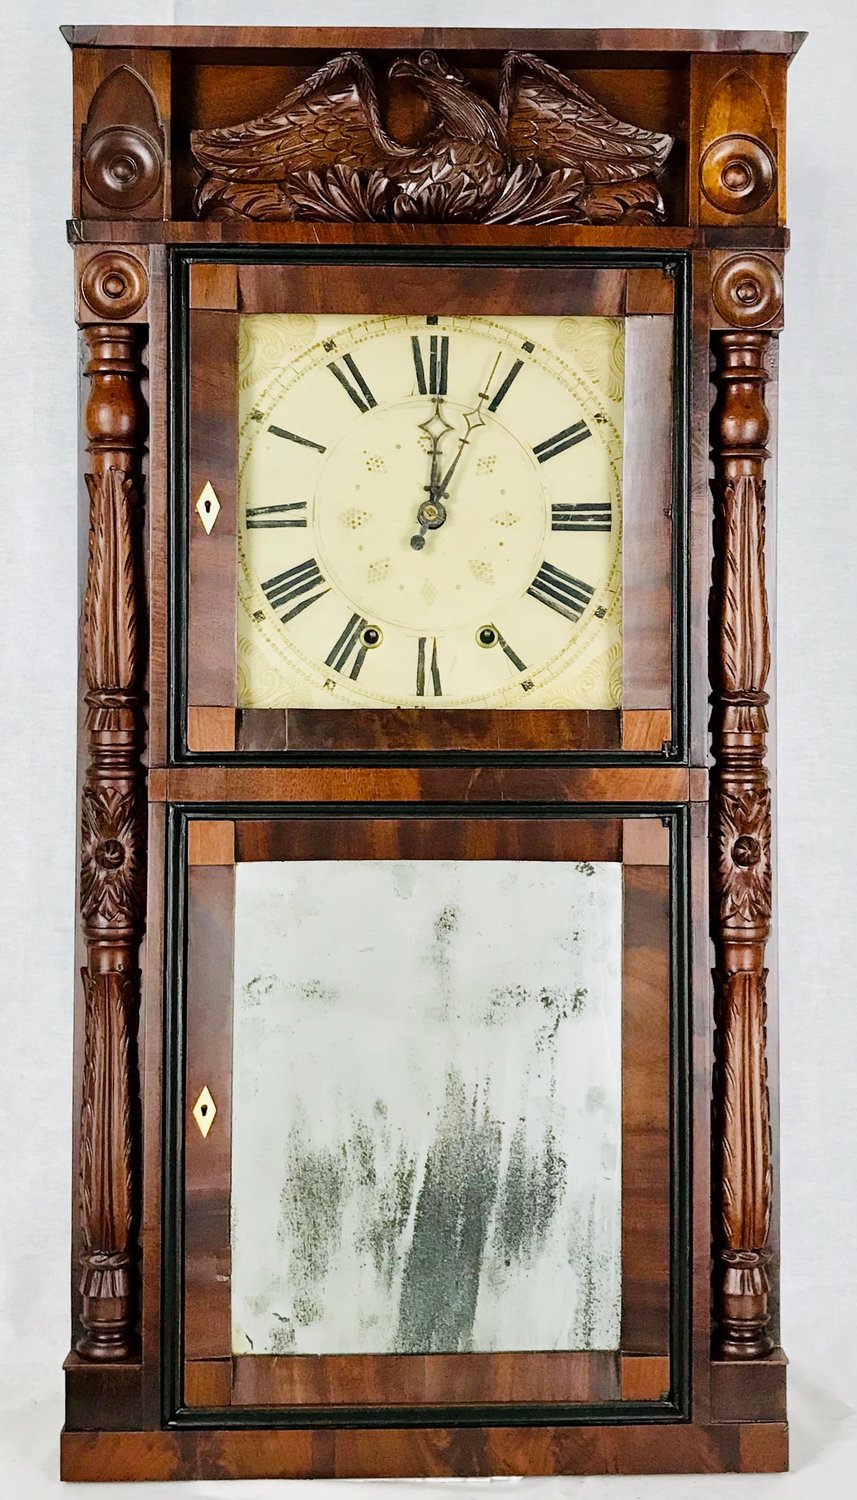 A RARE BREED — Clocks made in Madison County in the mid 1800s will be on display at the Madison County Historical Society from Nov. 1 to Dec. 19. The owner of the collection, Russell Oechsle, will be offering guided tours on Nov. 21 and 28 at 1 p.m. and Dec. 12 and 19 at 1 p.m.